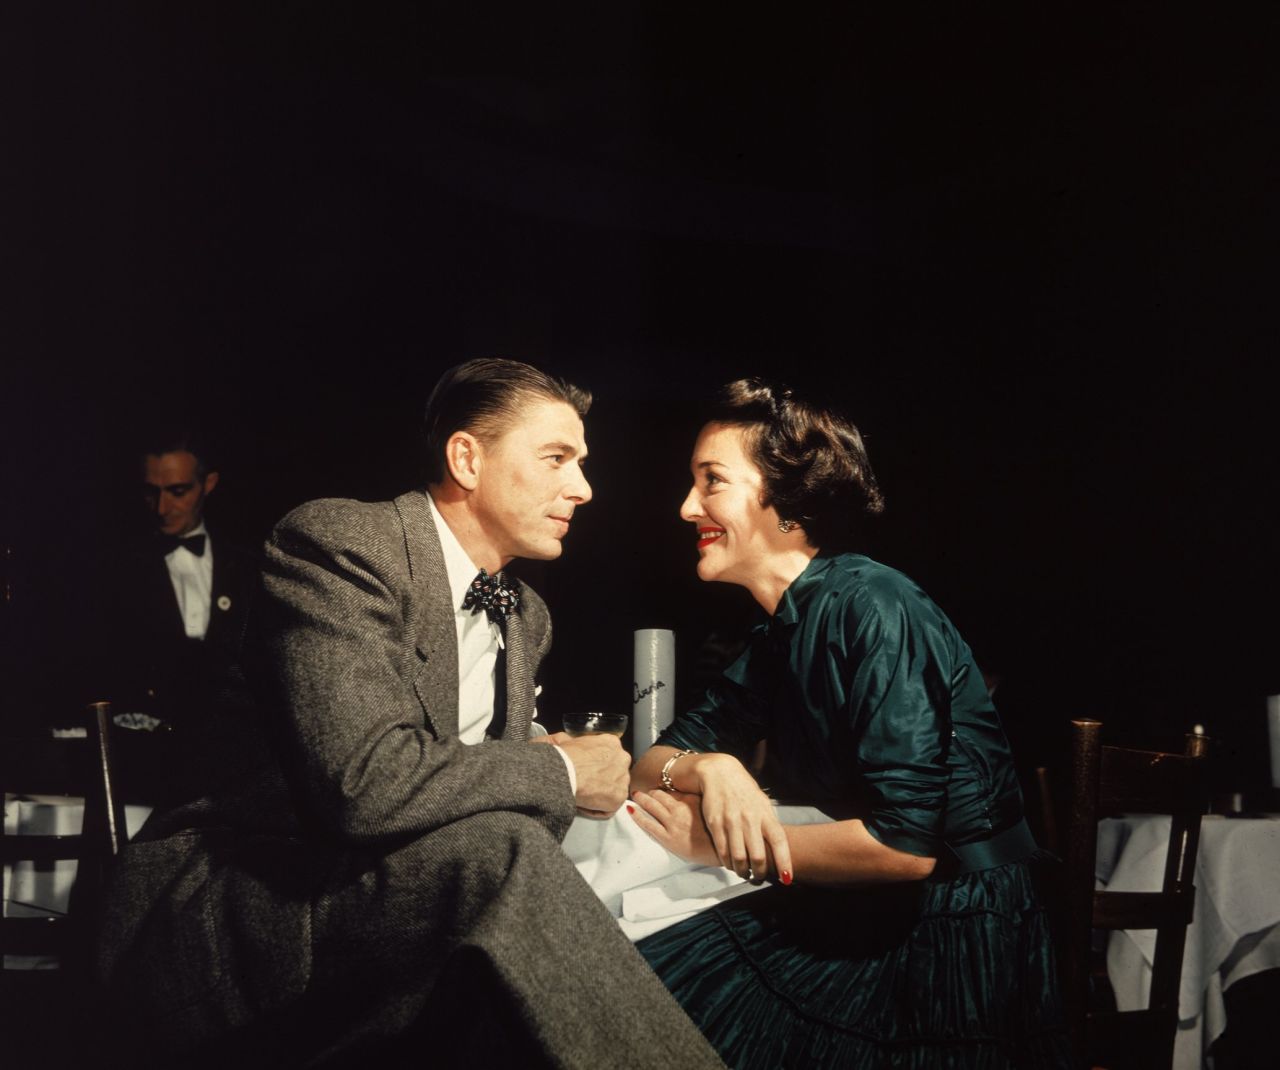 Reagan married actress Nancy Davis in 1952. "I think my life really began when I met Nancy," Reagan once said.